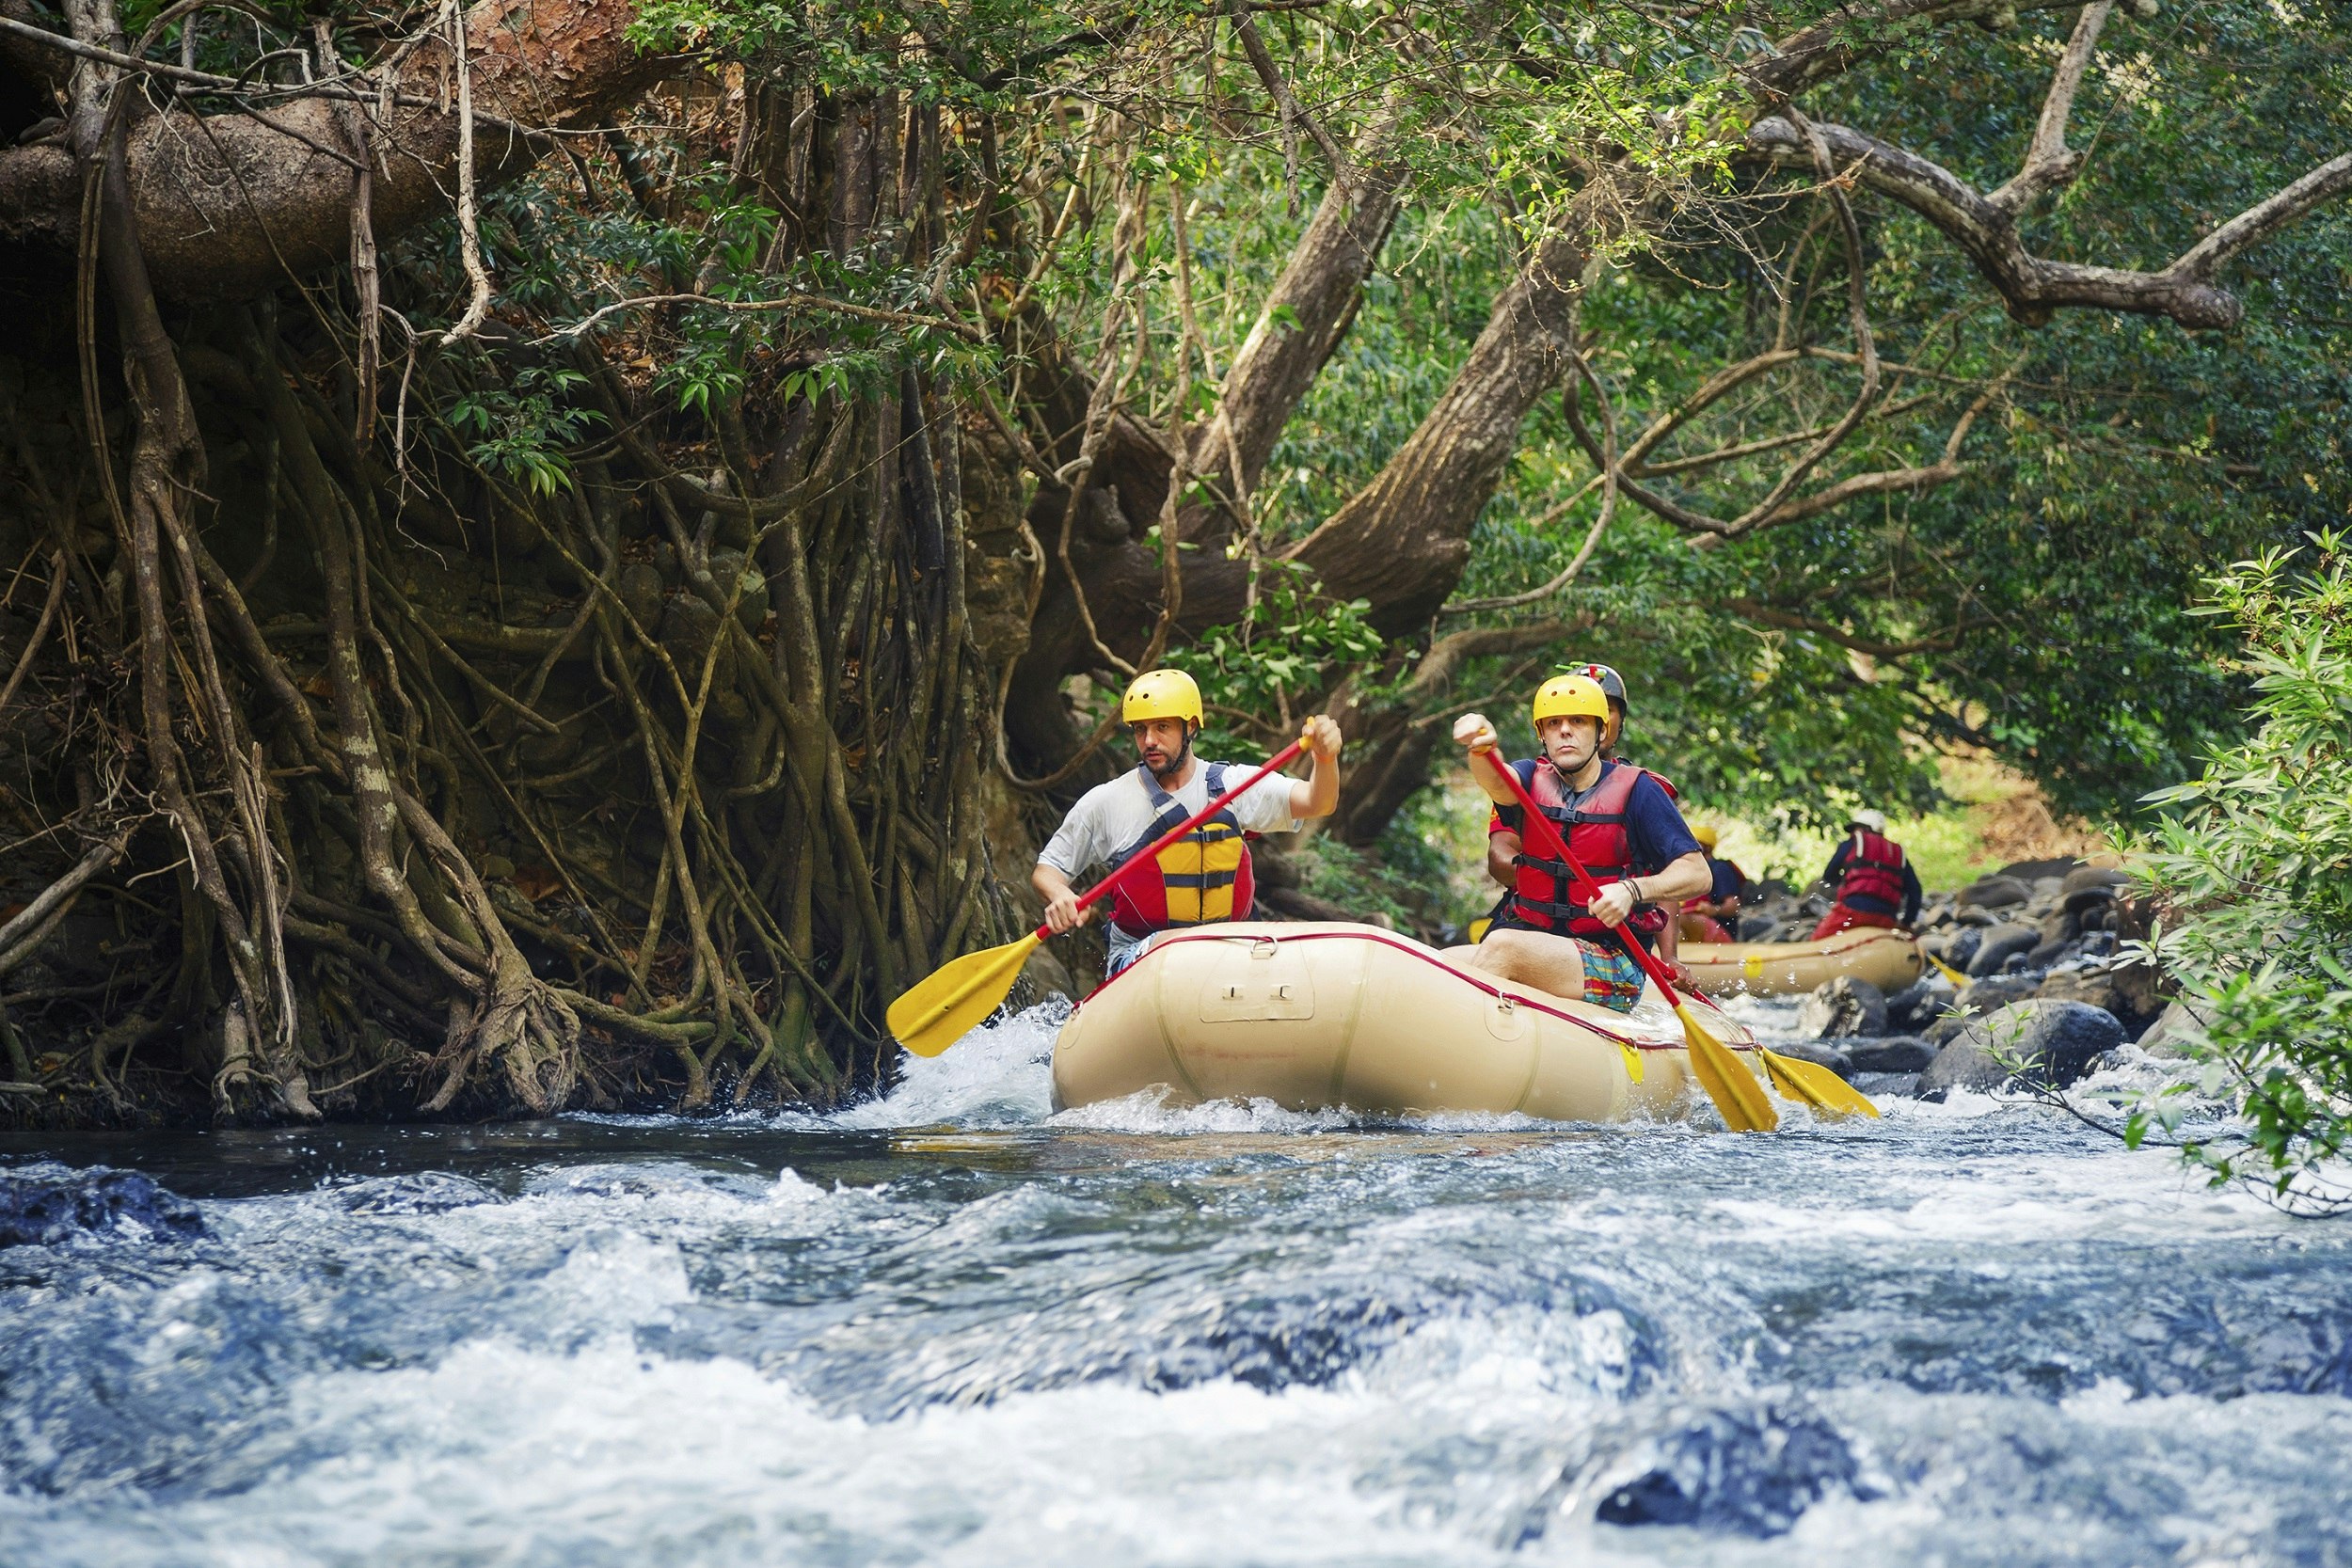 Three people in a whitewater raft navigate a section of river between rocks and a riverbank covered in vines and tree roots.